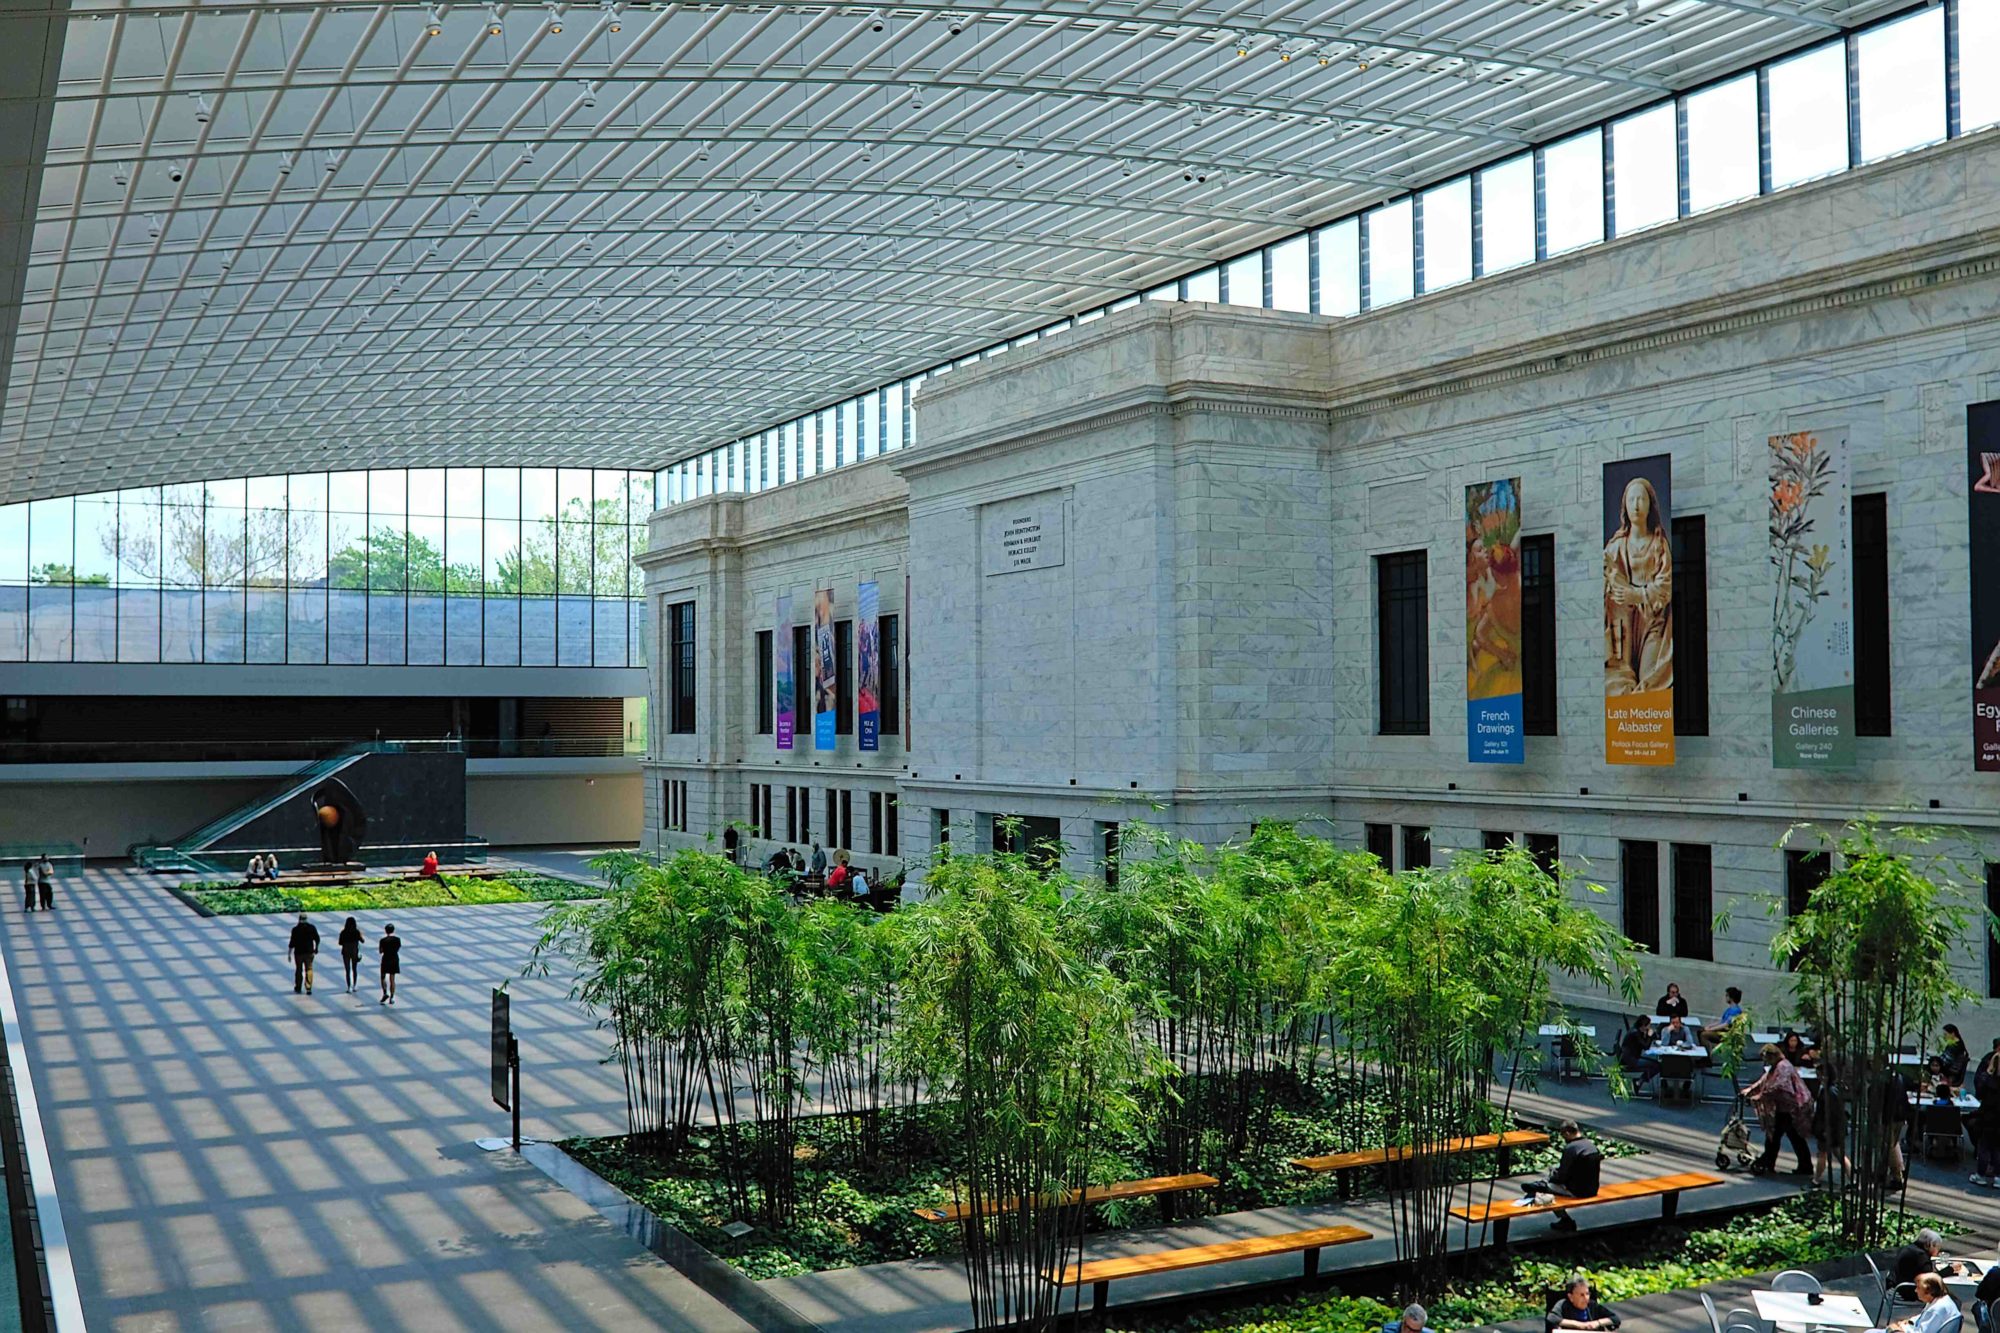 The light-filled Atrium at The Cleveland Museum of Art